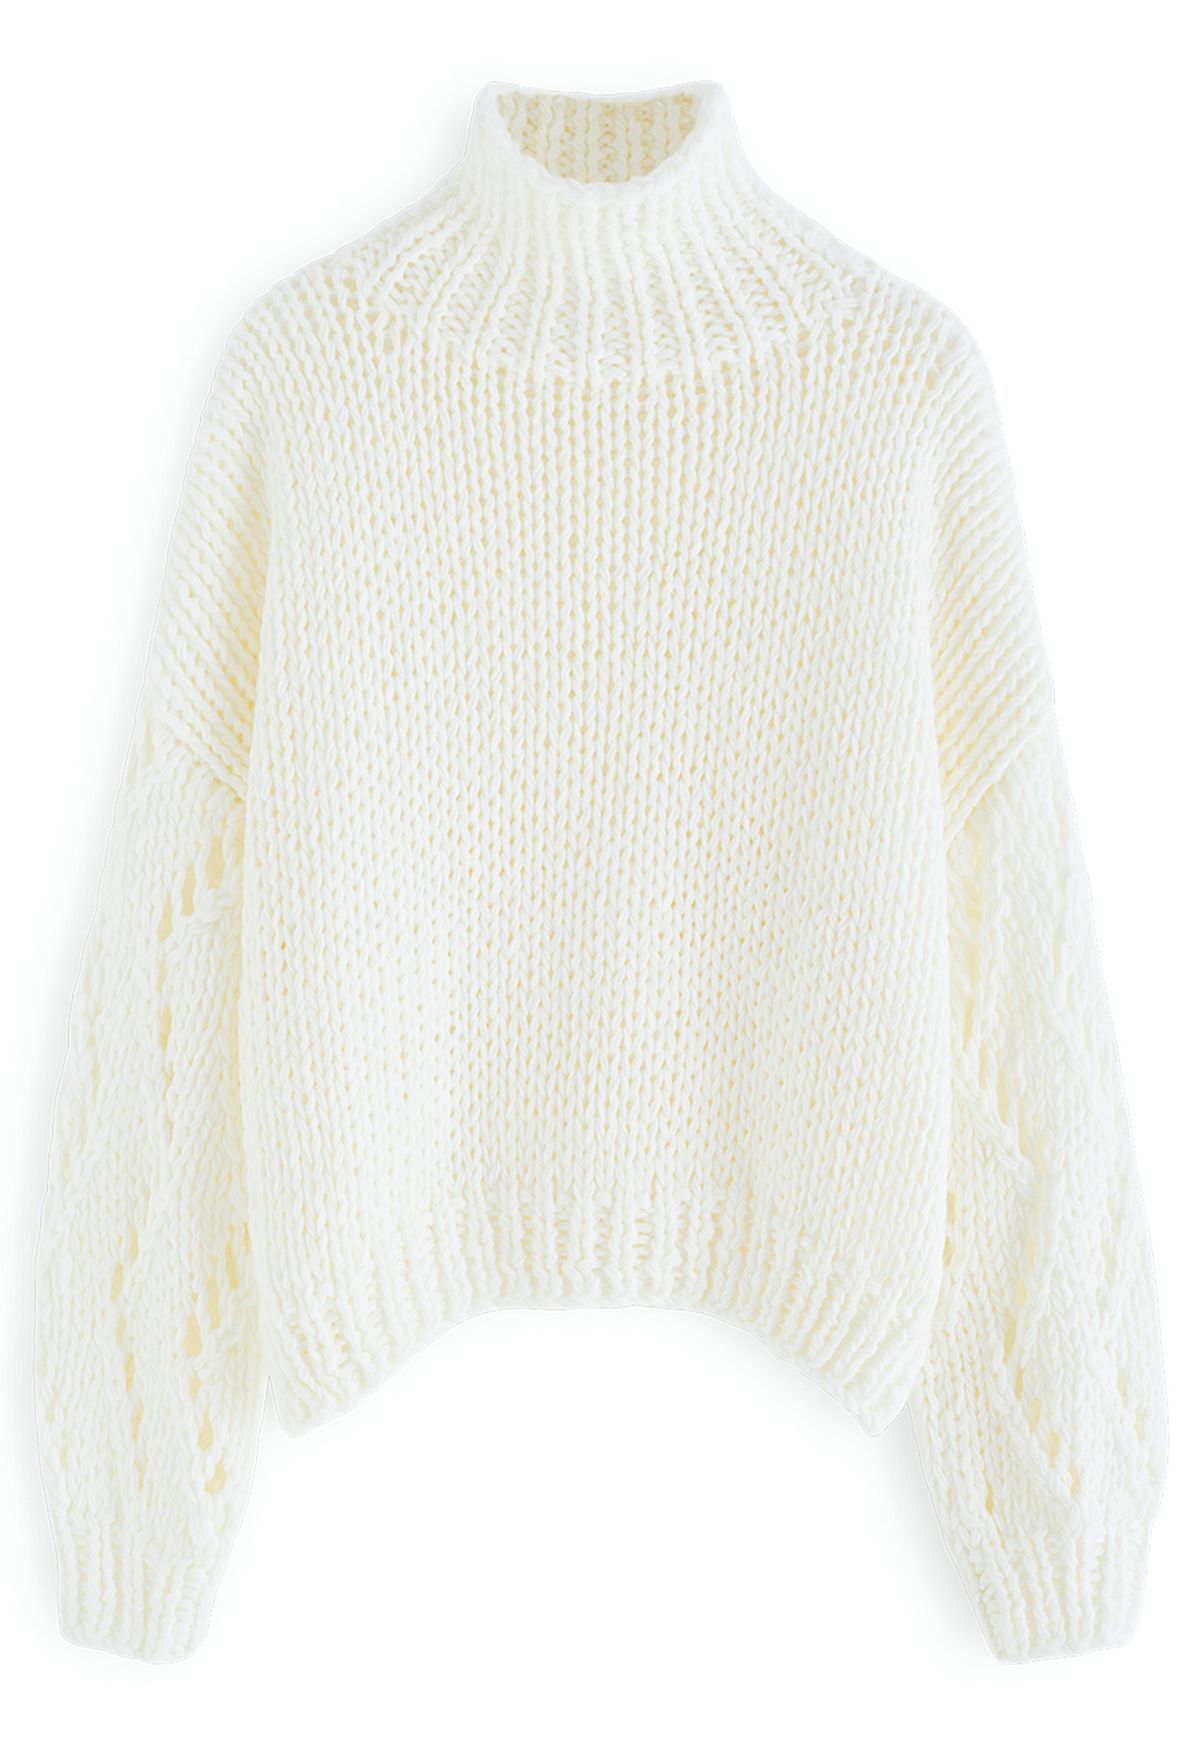 Pointelle Sleeve High Neck Hand-Knit Sweater in White | Chicwish